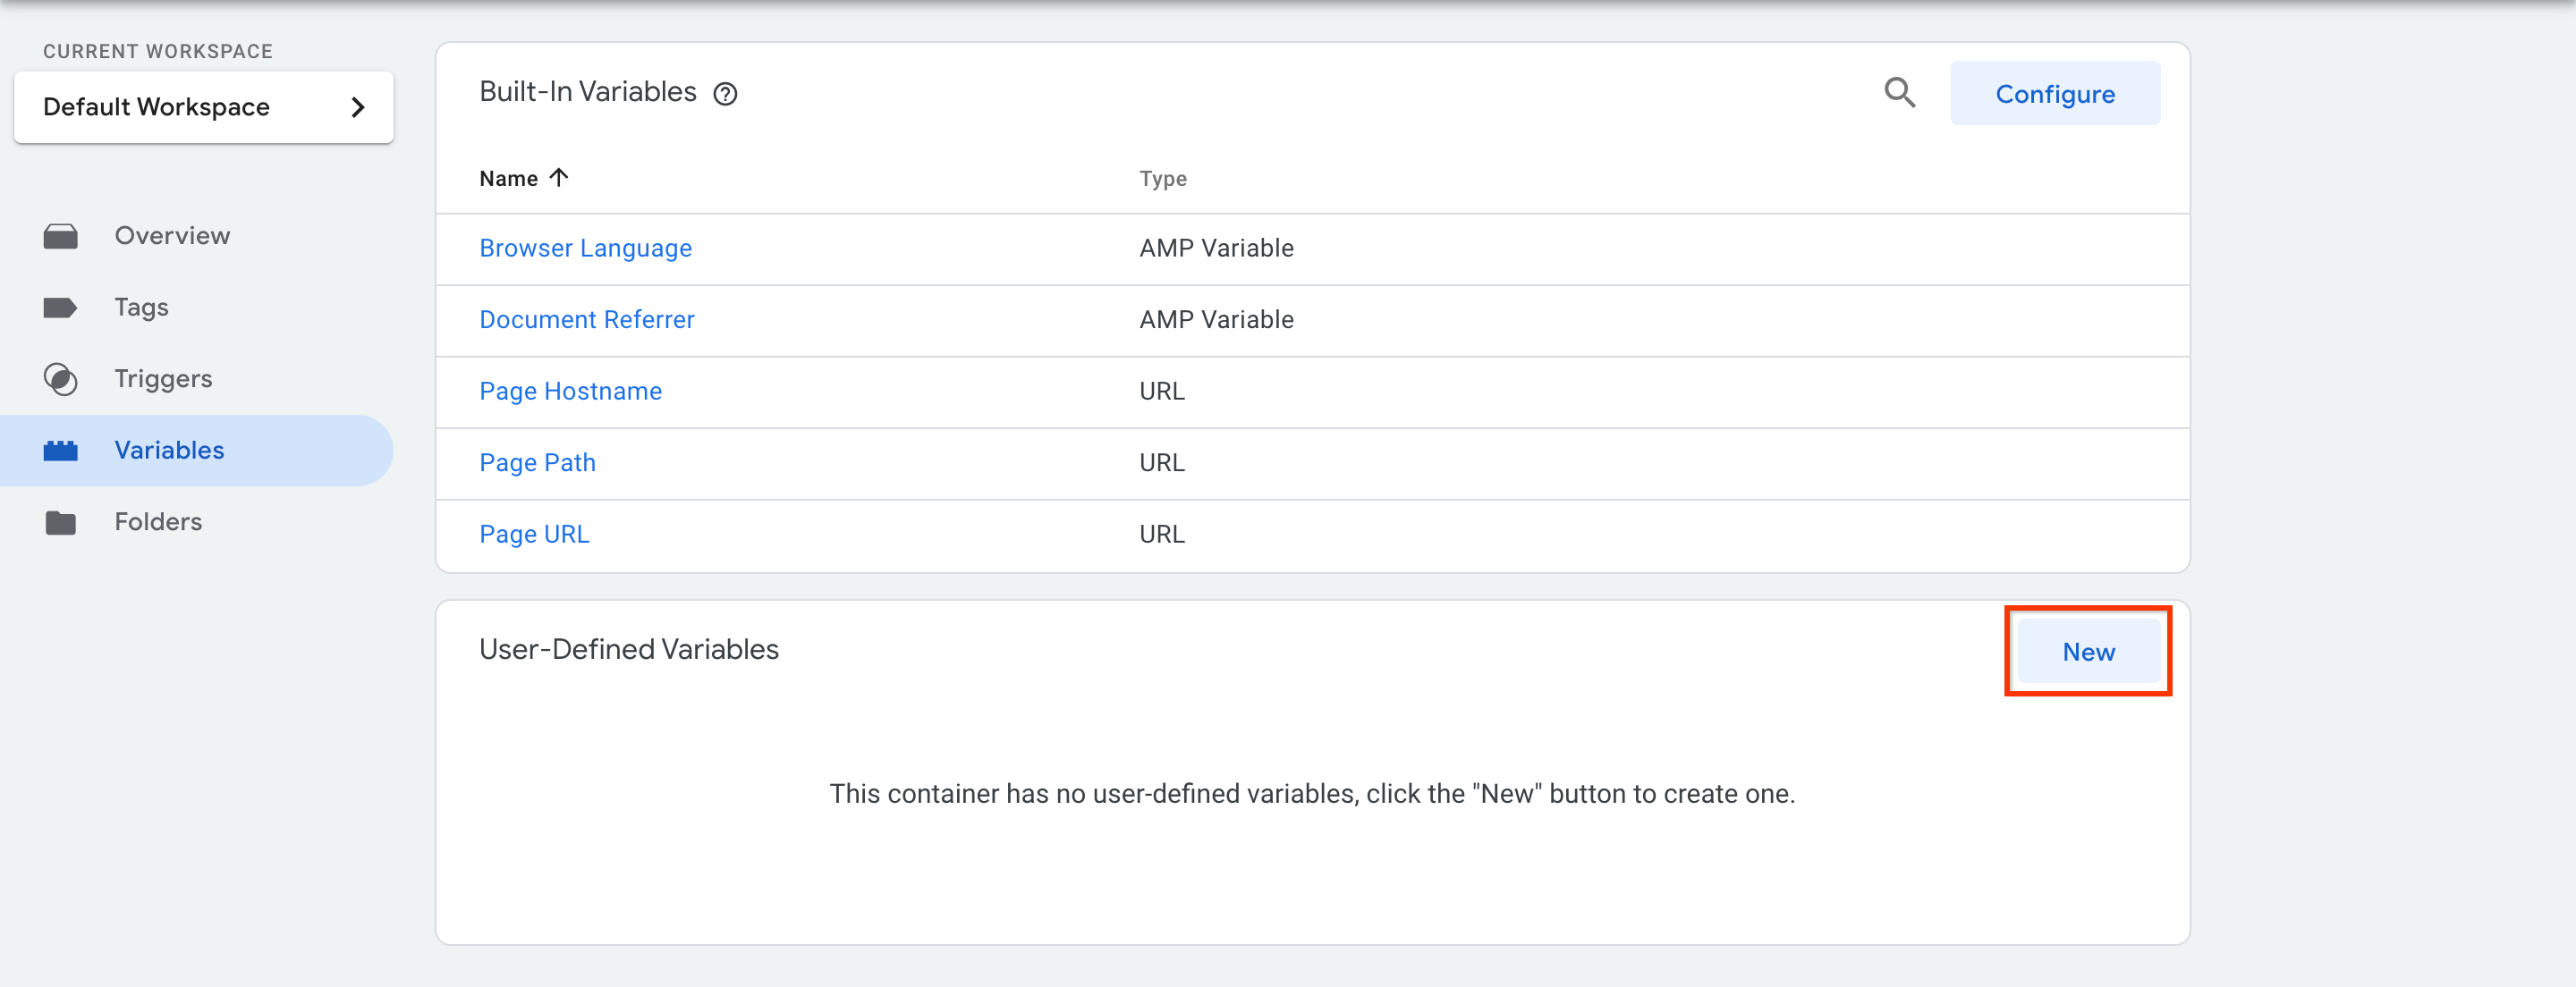 A screenshot of the New button highlighted in the "User-Defined Variables" section on the Variables page